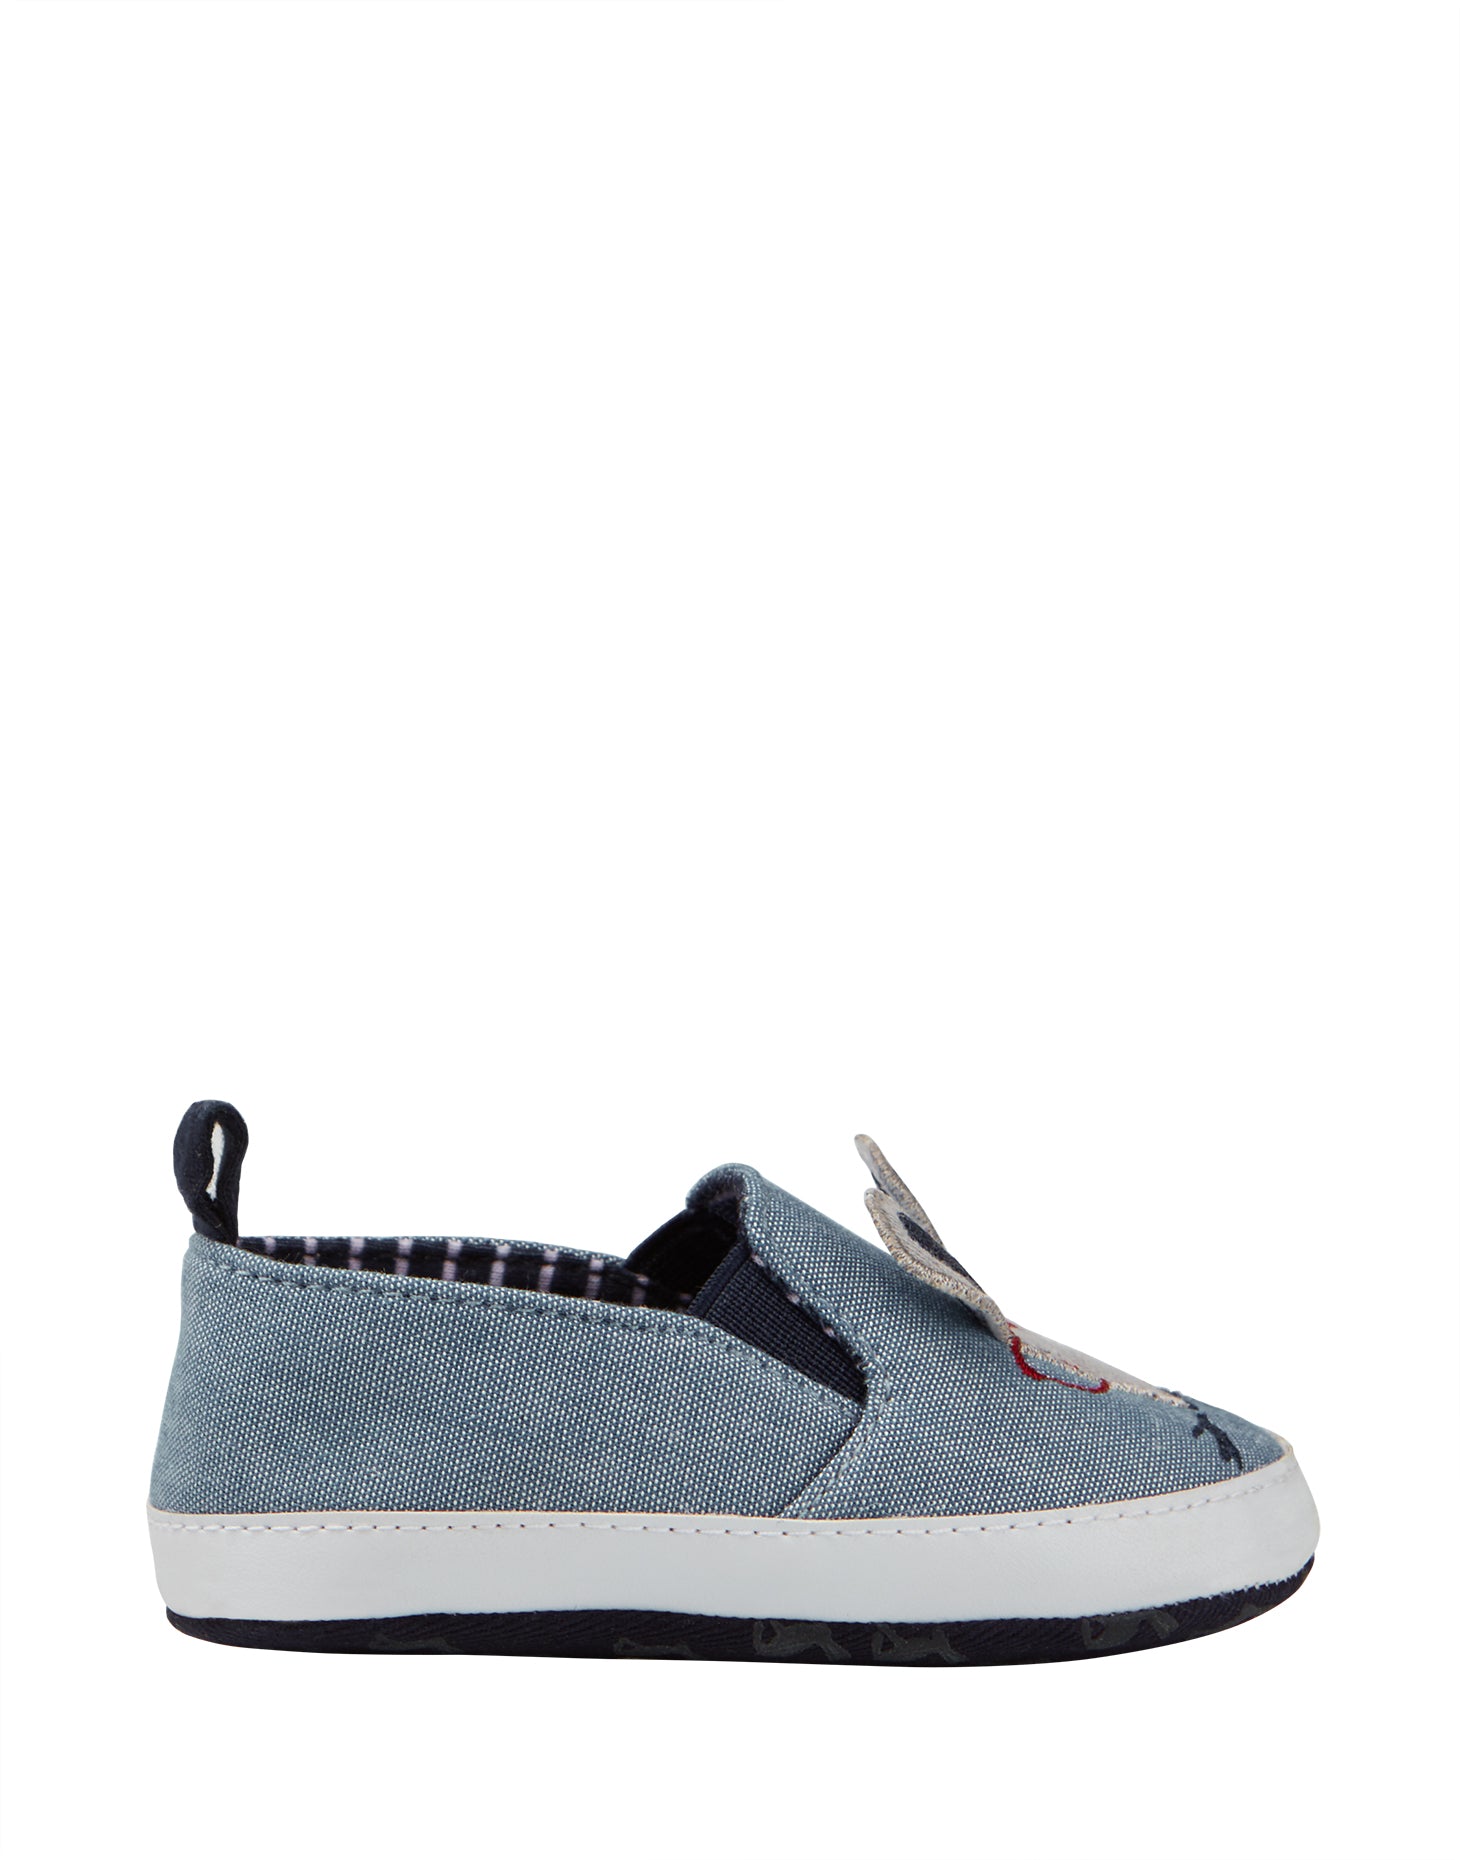 Littleton Blue Mouse Baby Shoes